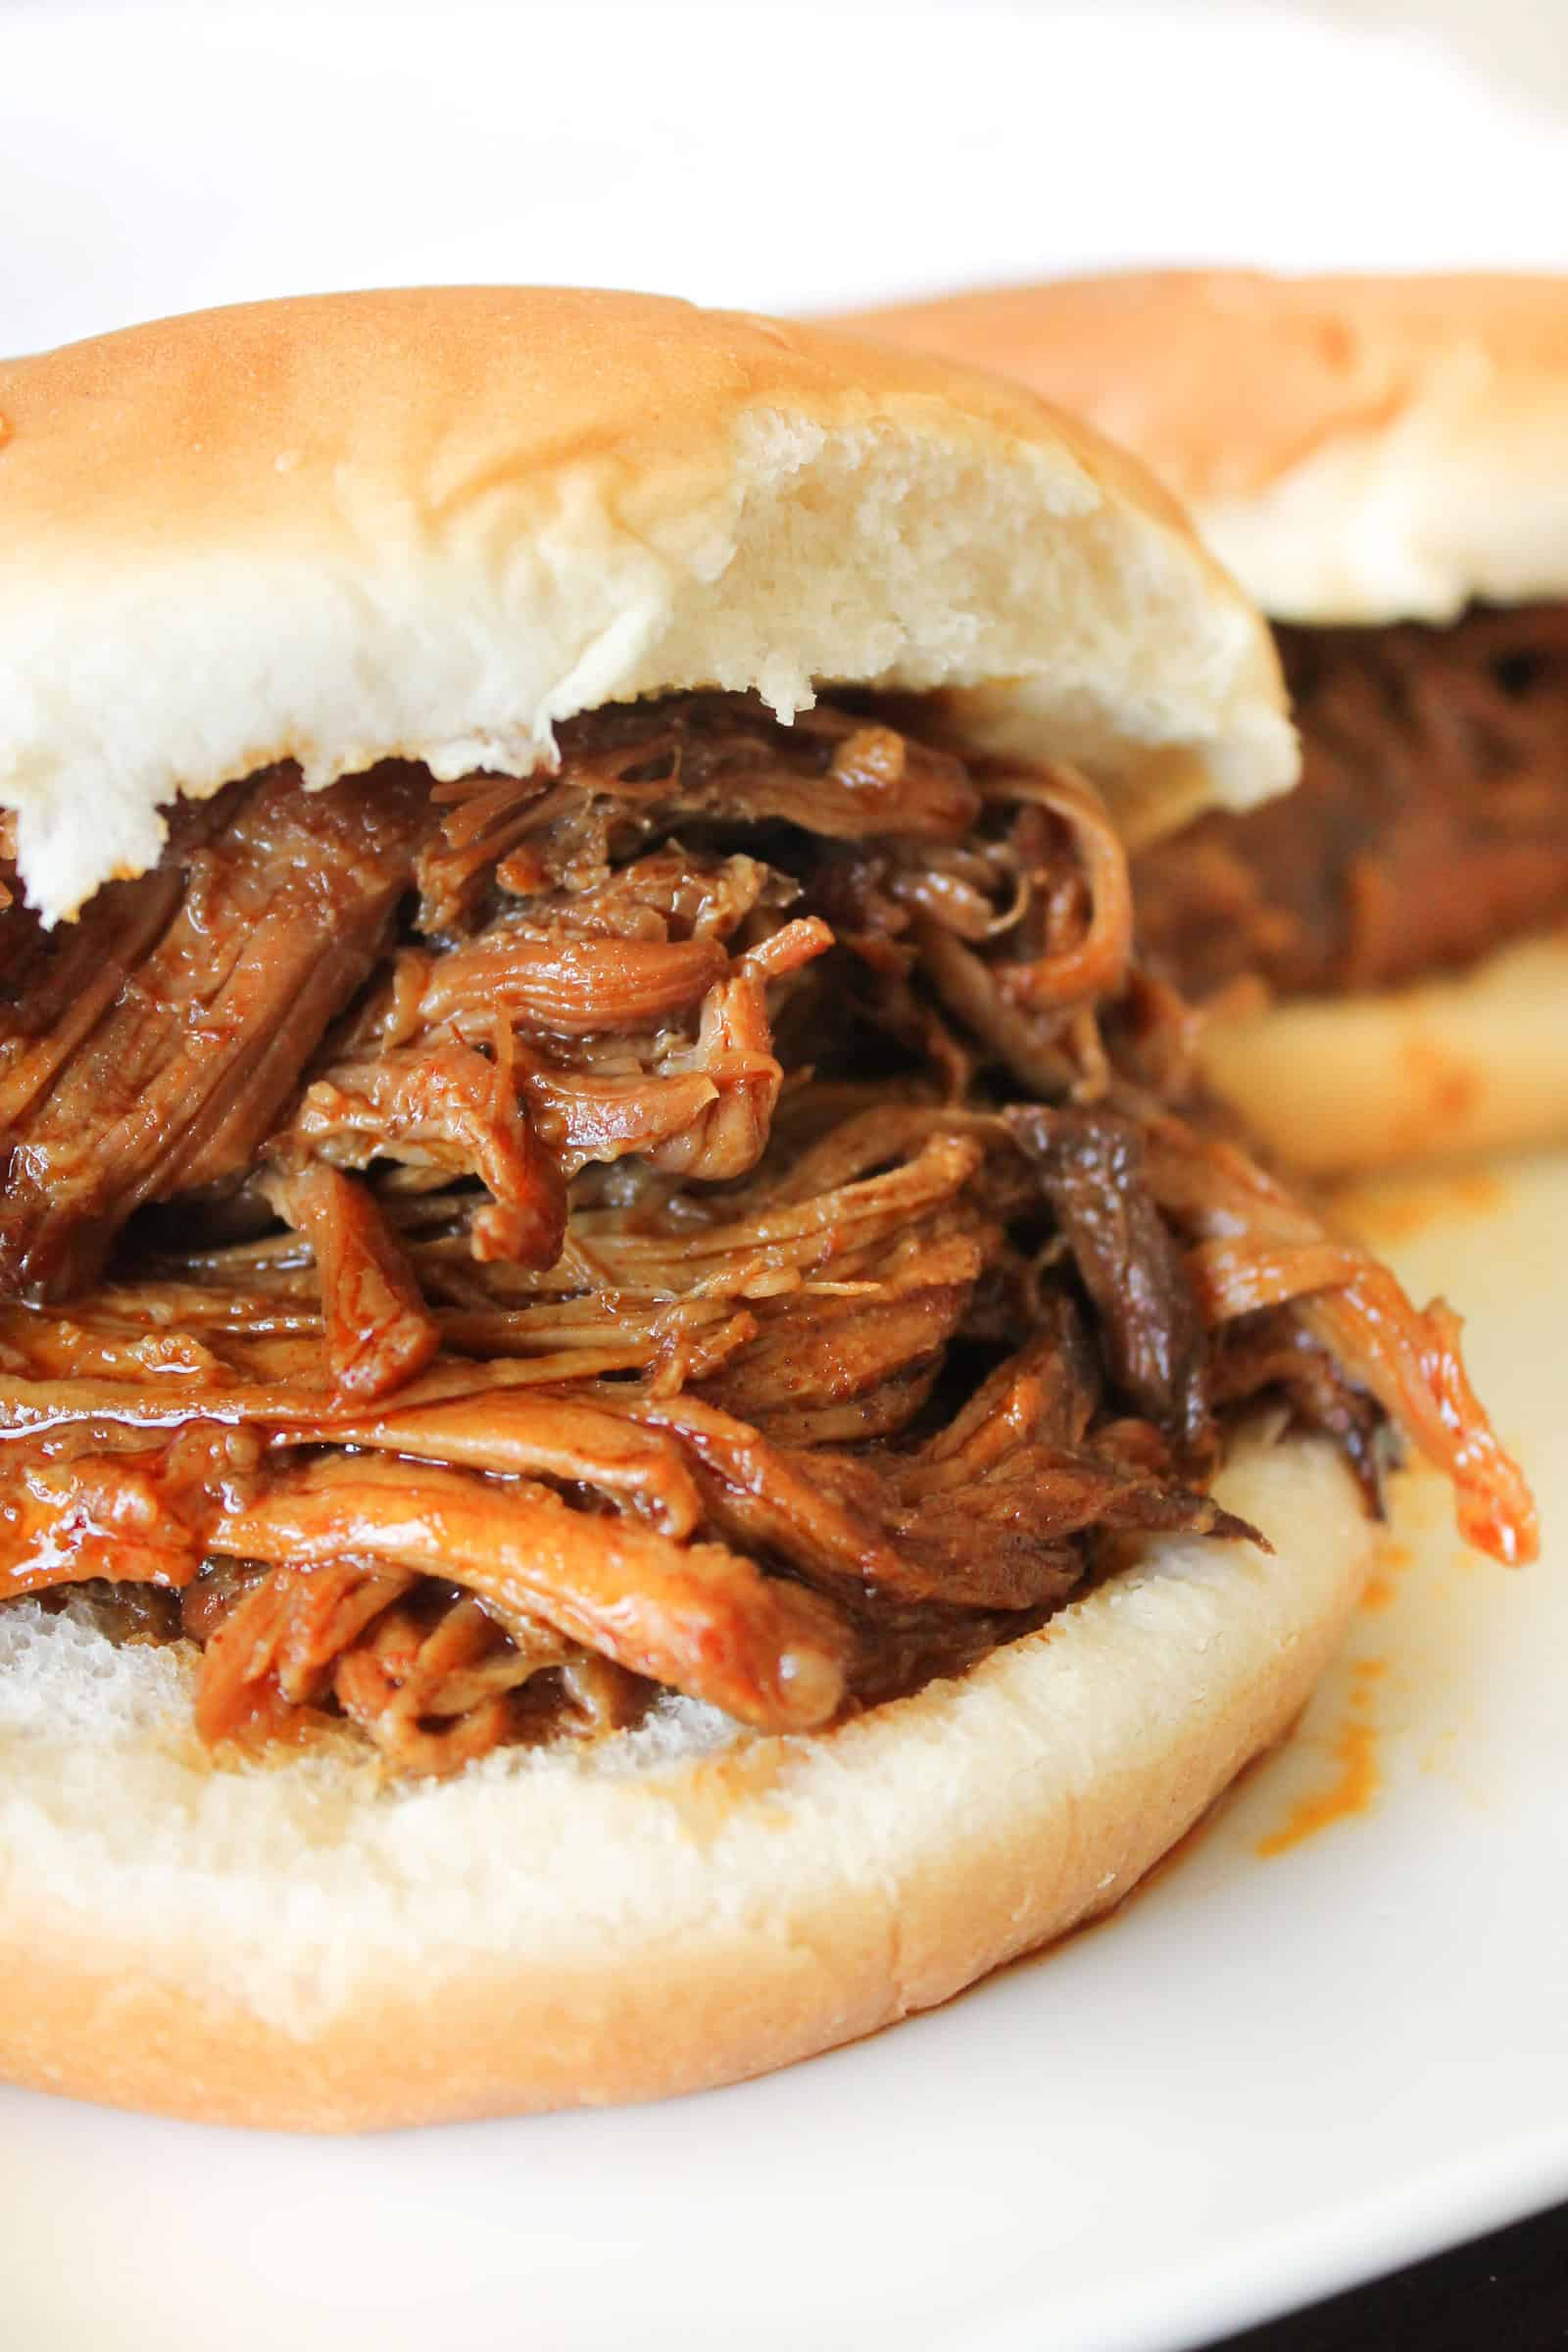 https://www.sixsistersstuff.com/wp-content/uploads/2012/03/smoked-pulled-pork.jpg